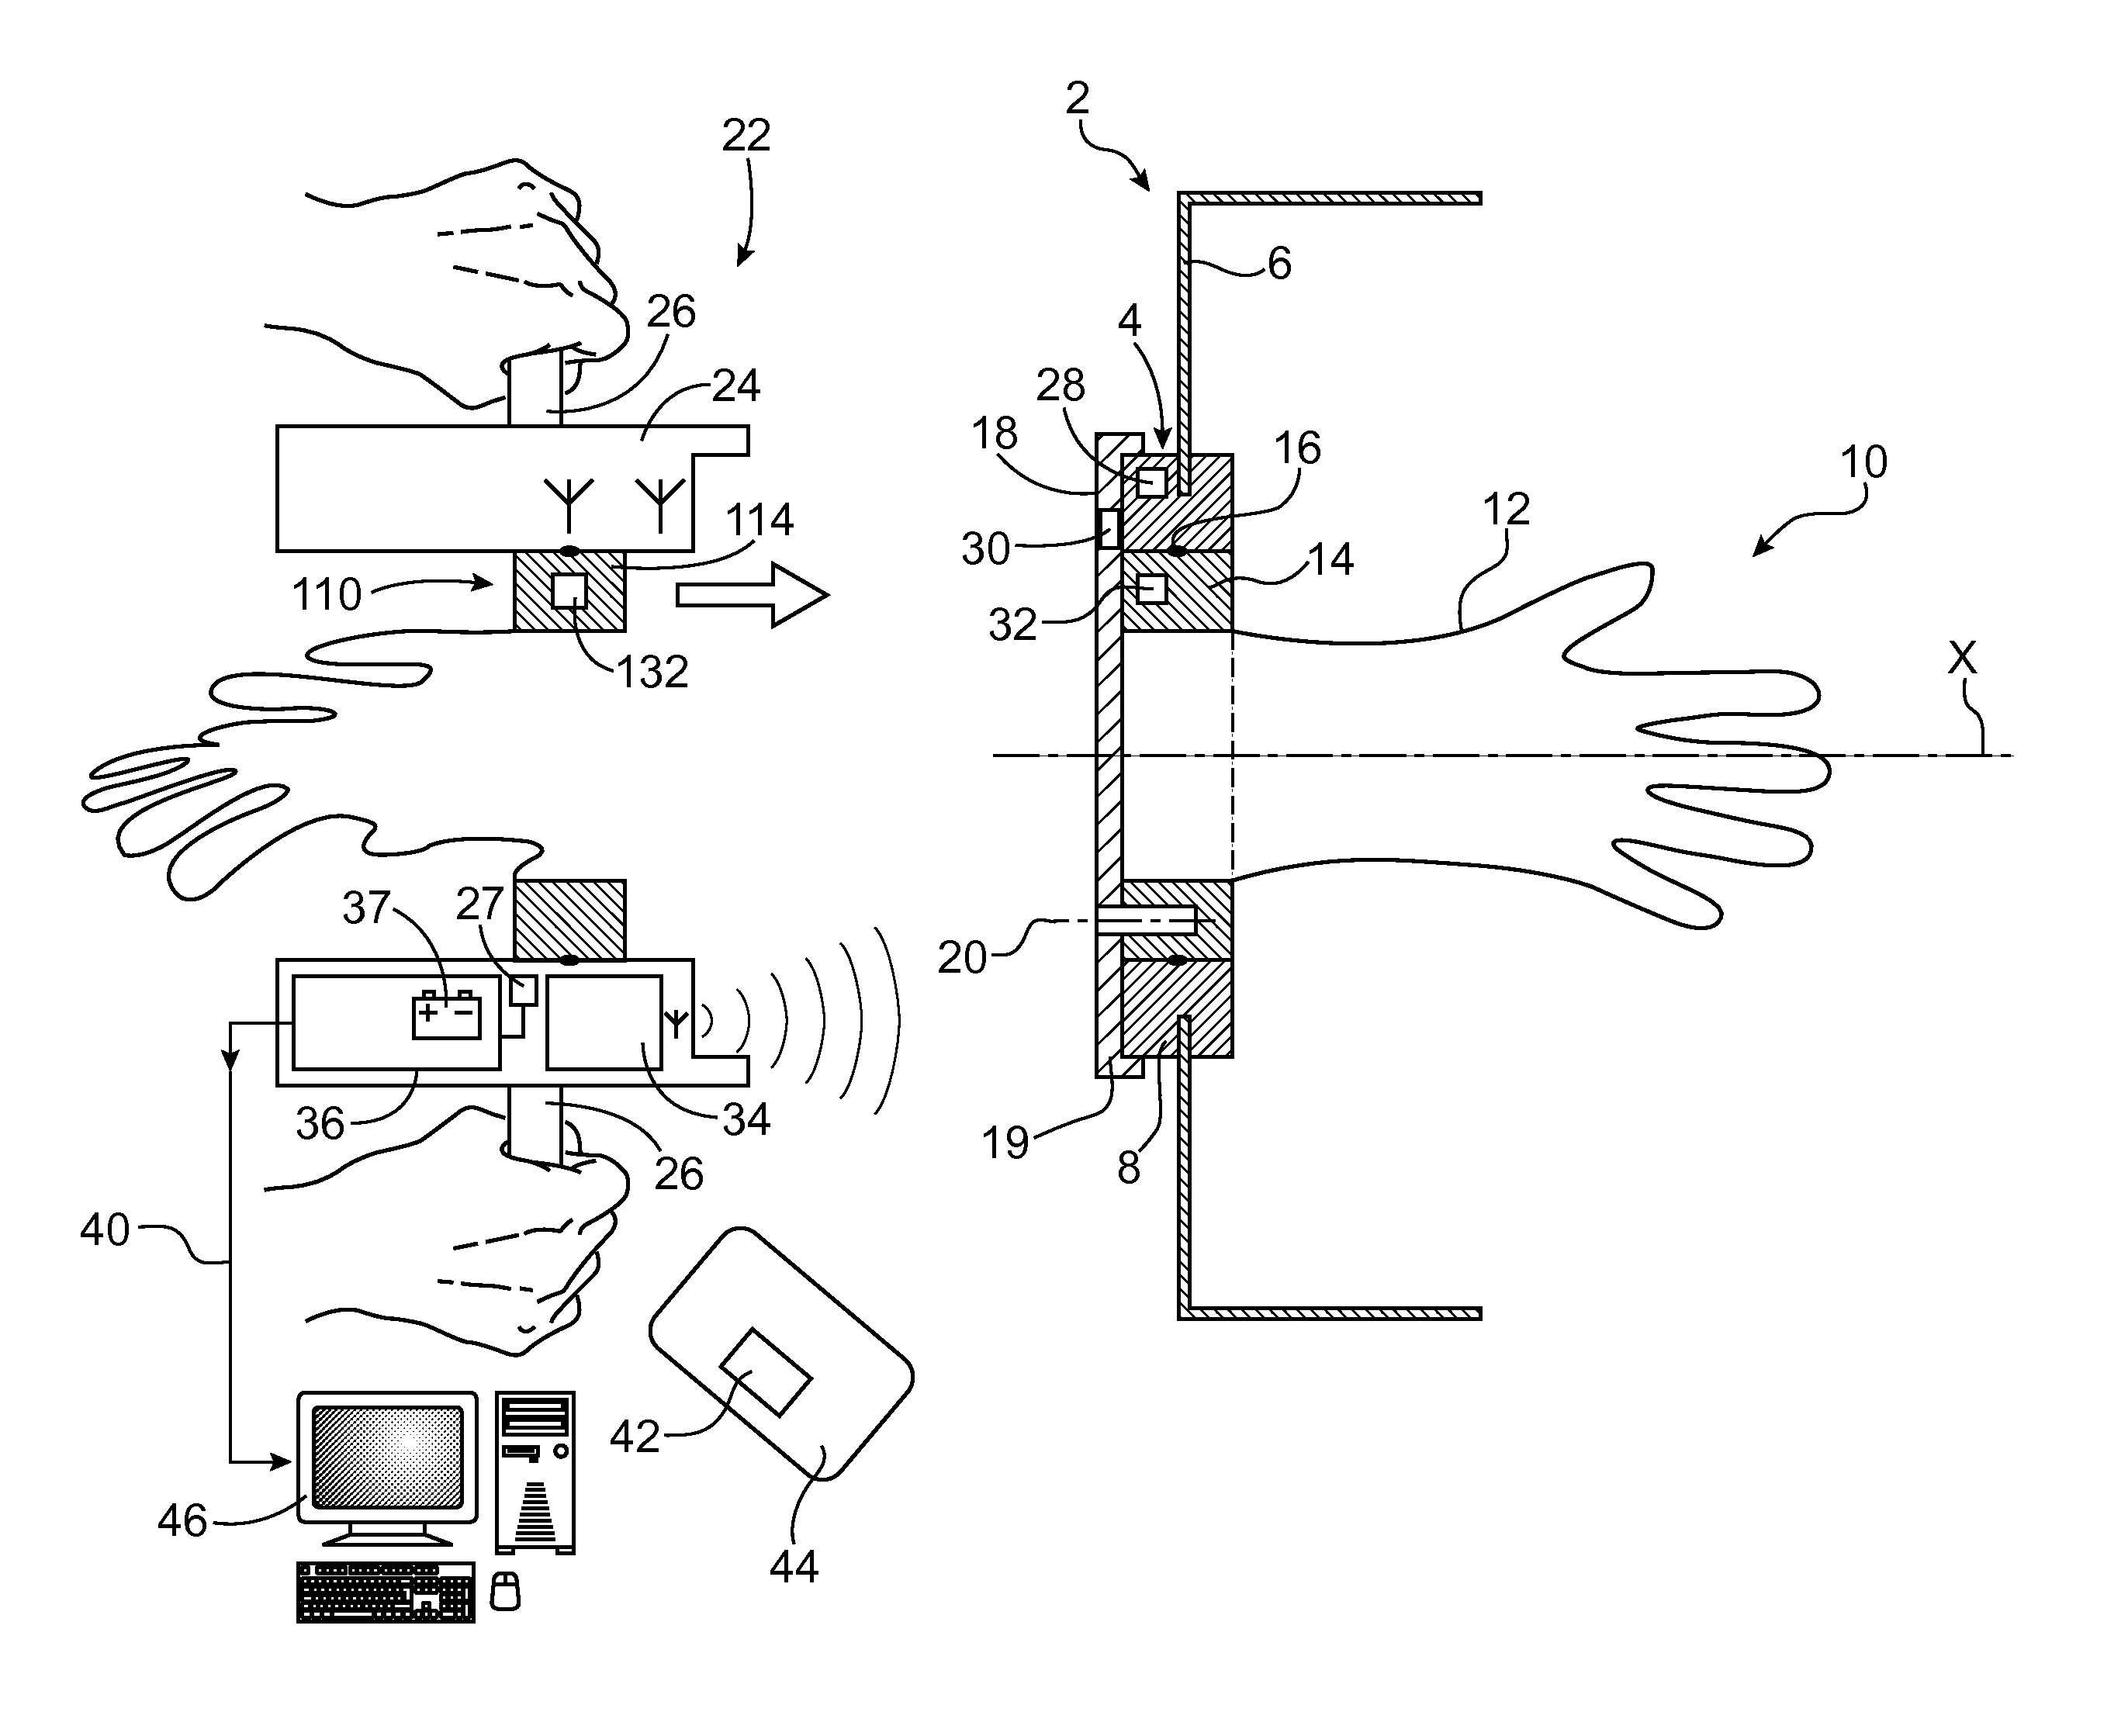 Installation comprising a glove box and a glove change device incorporating monitoring of the glove change